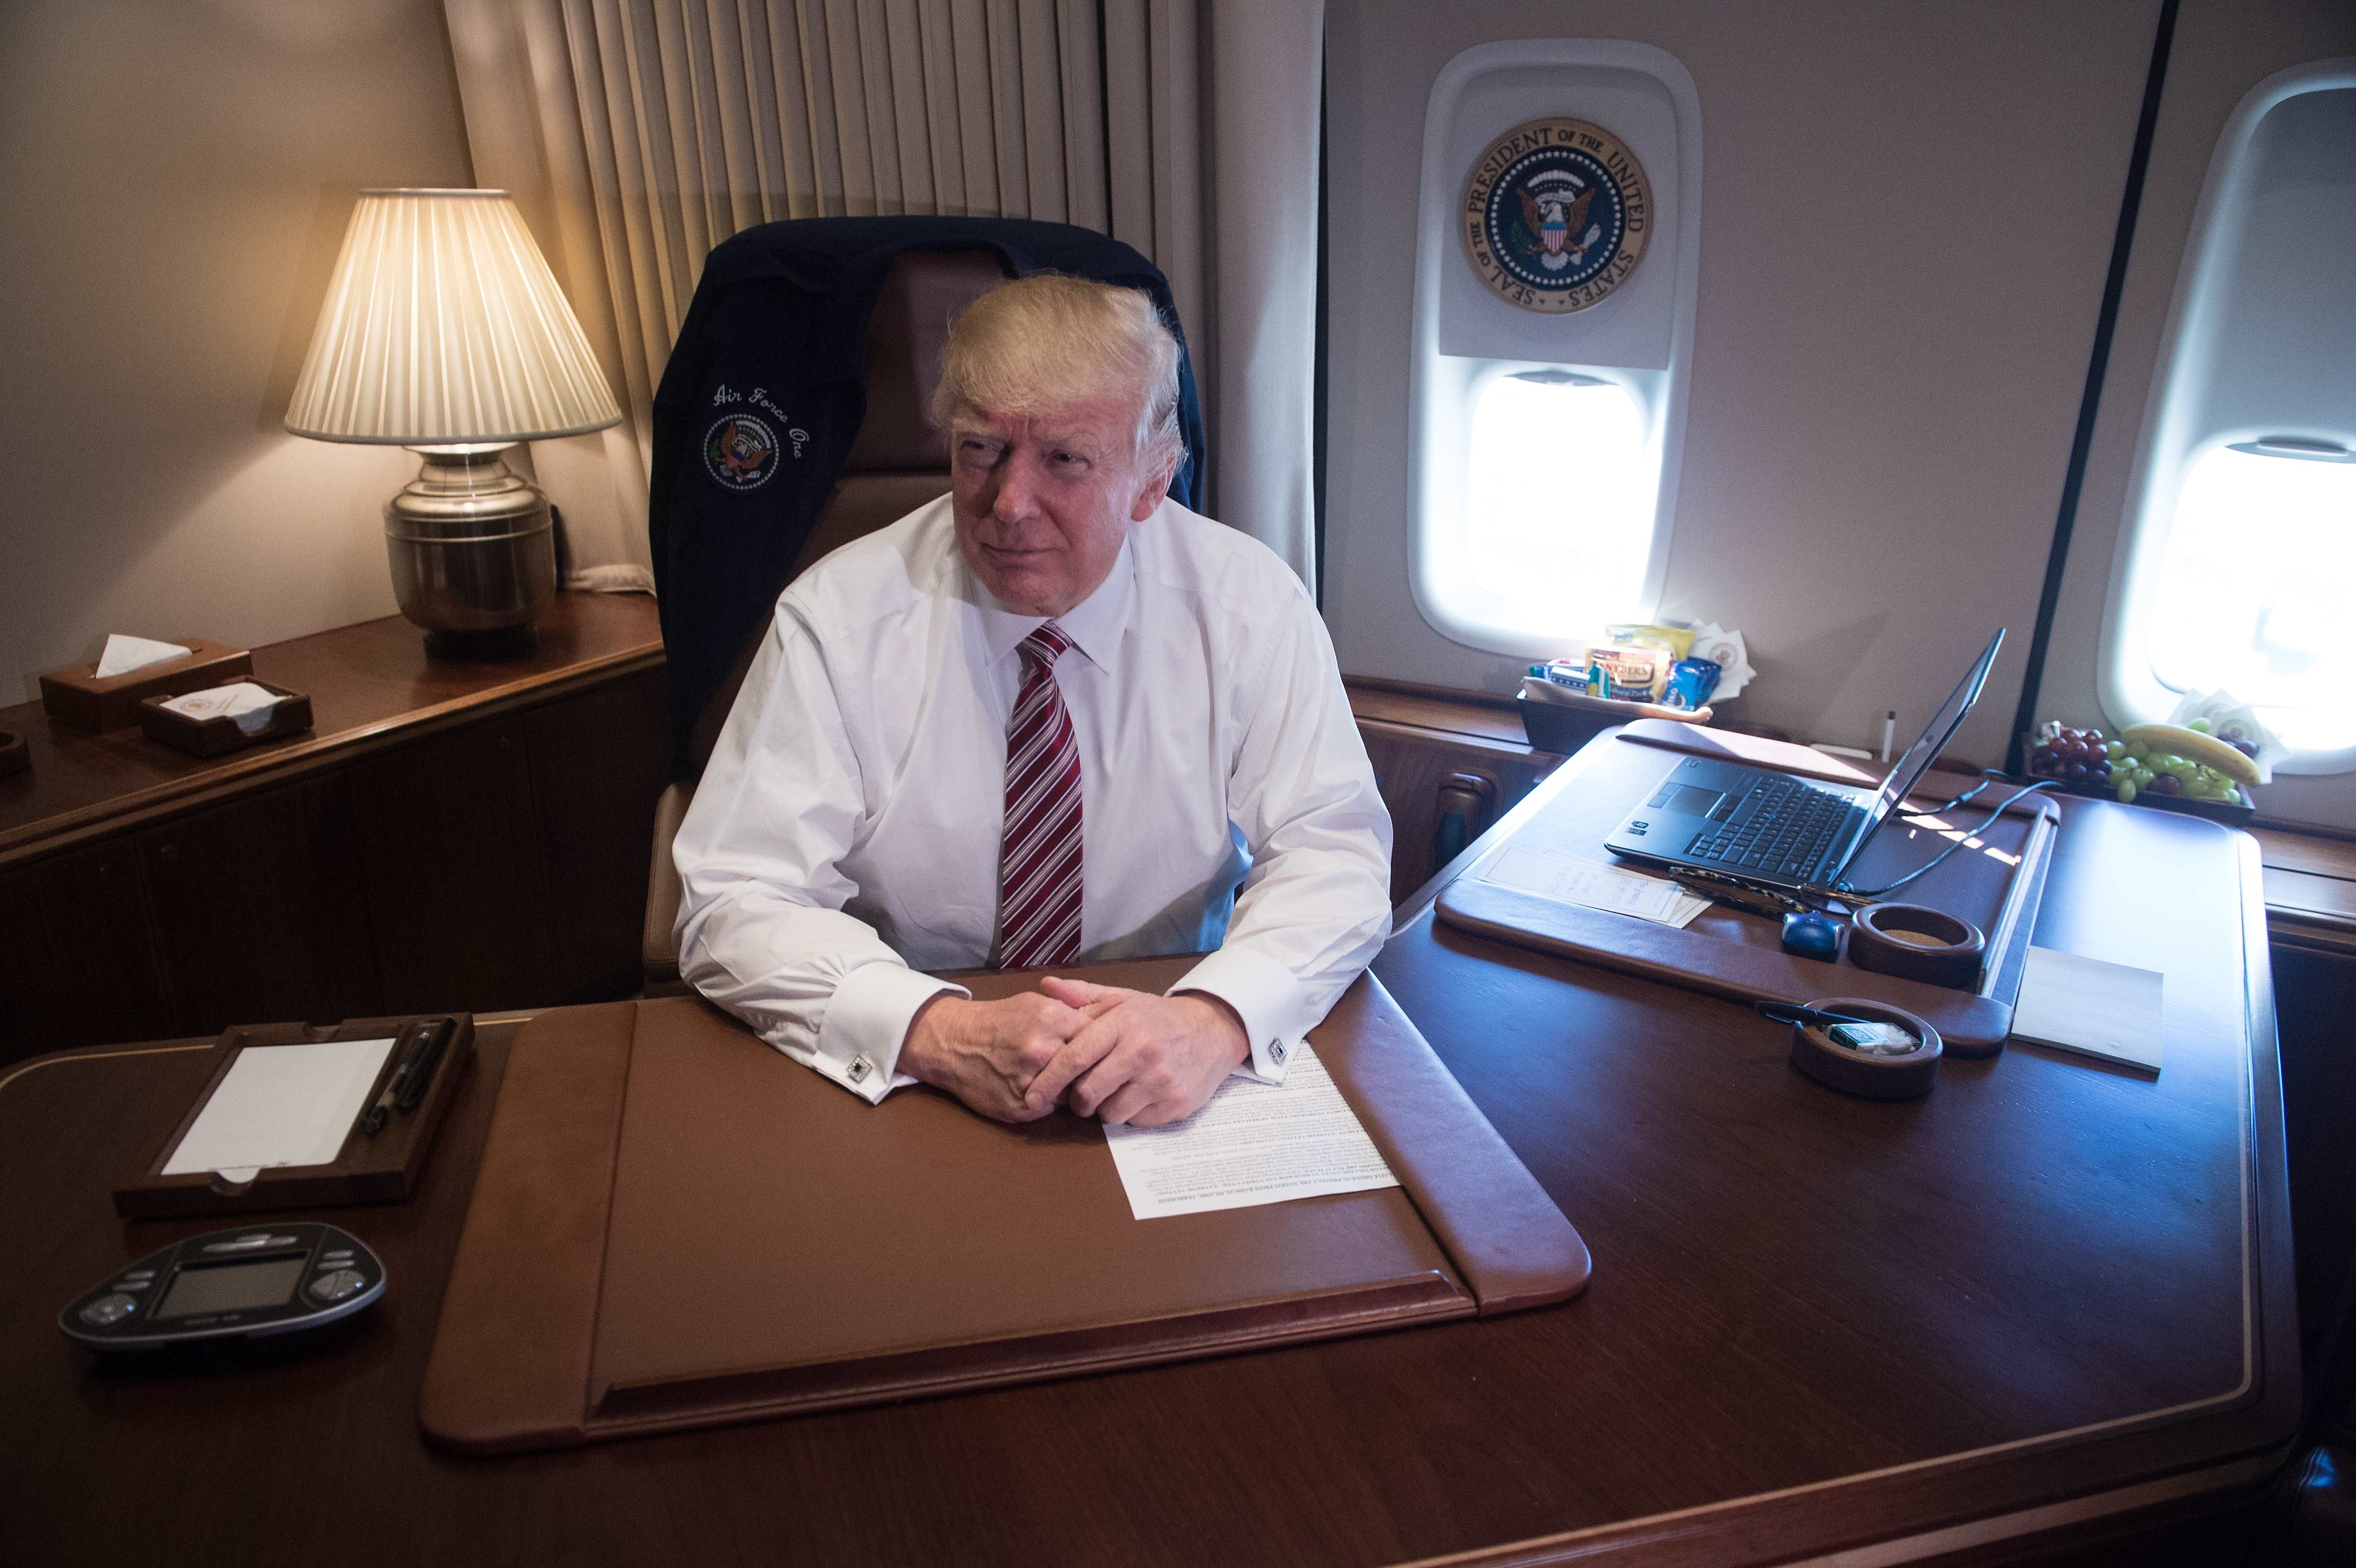 Air Force One's Kitchen Can “Feed 100 People At A Time - Trump To